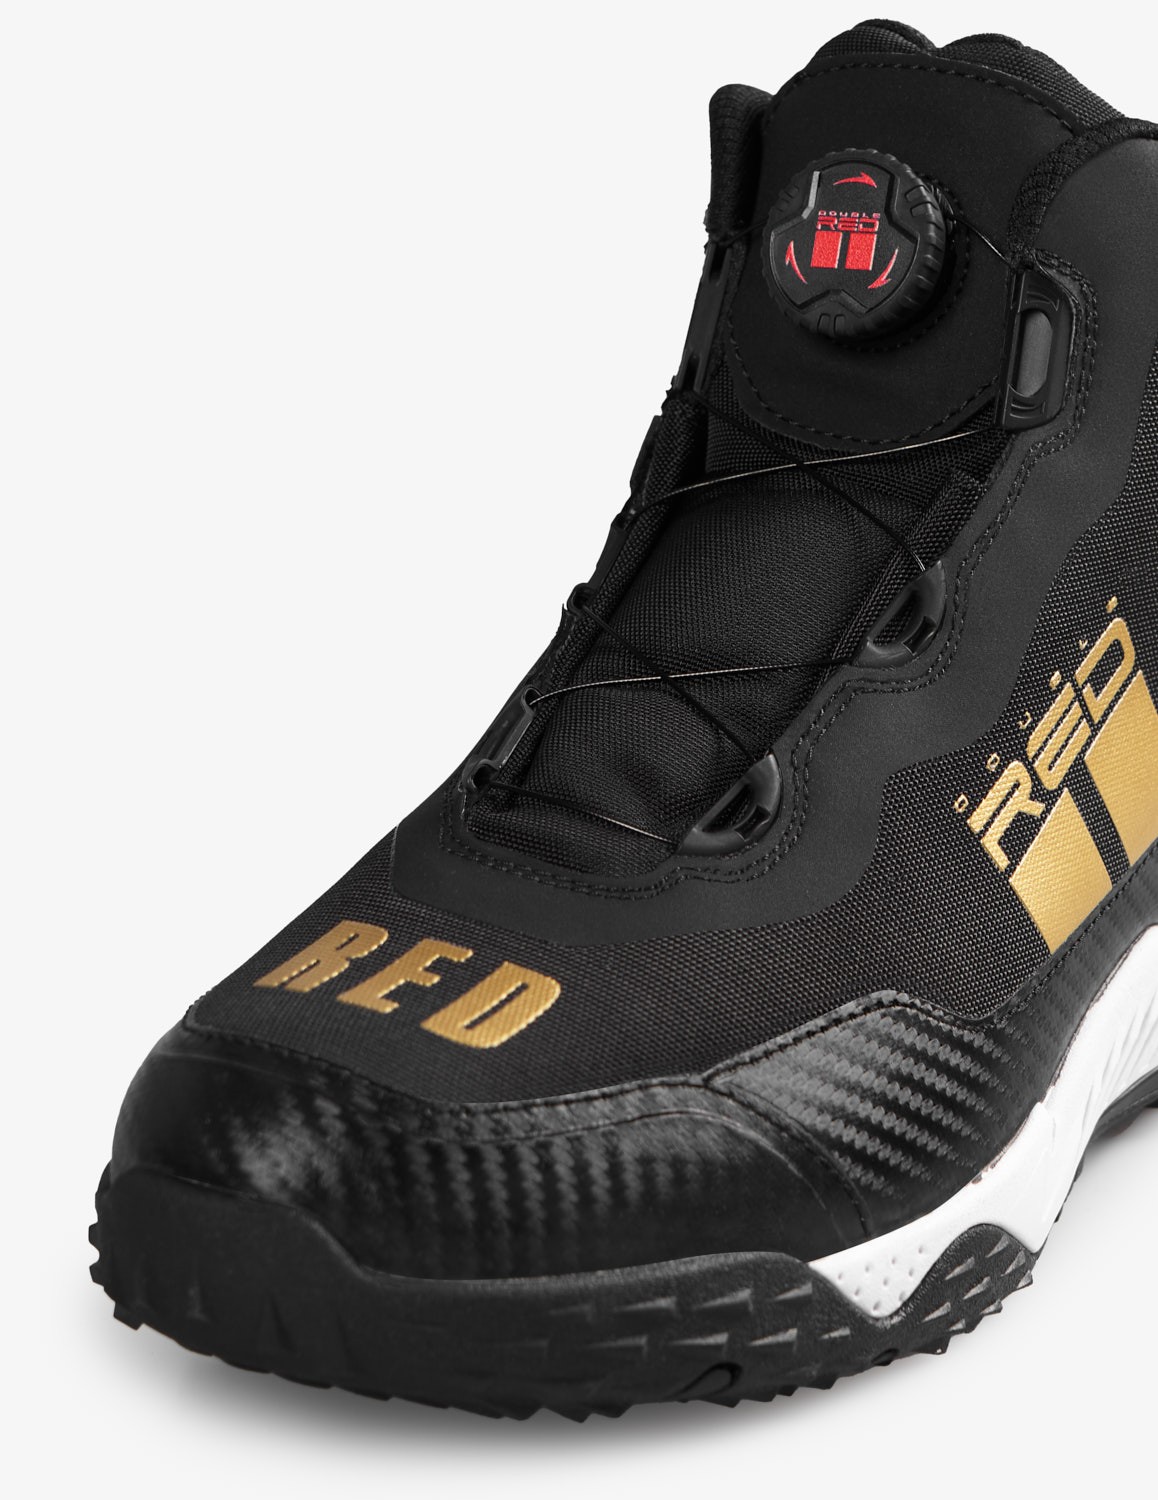 Boots WIRE Carbon Edition Gold